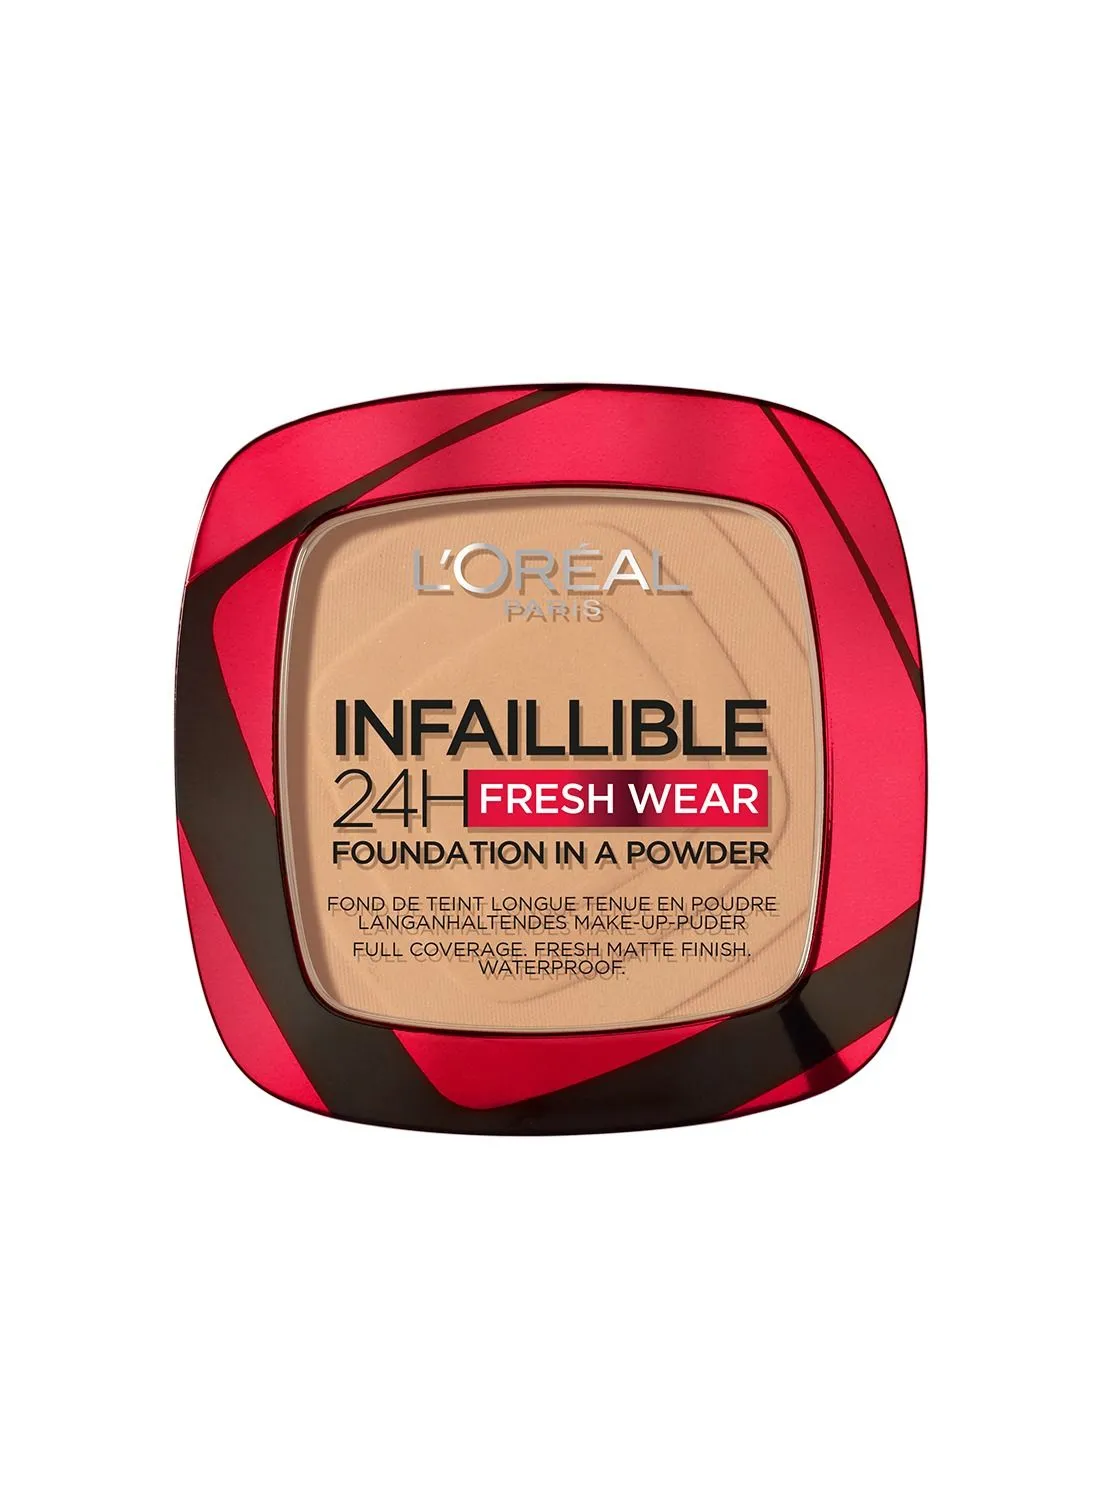 L'OREAL PARIS Infaillible 24H Fresh Wear Foundation In A Powder, 250 Radiant Sand